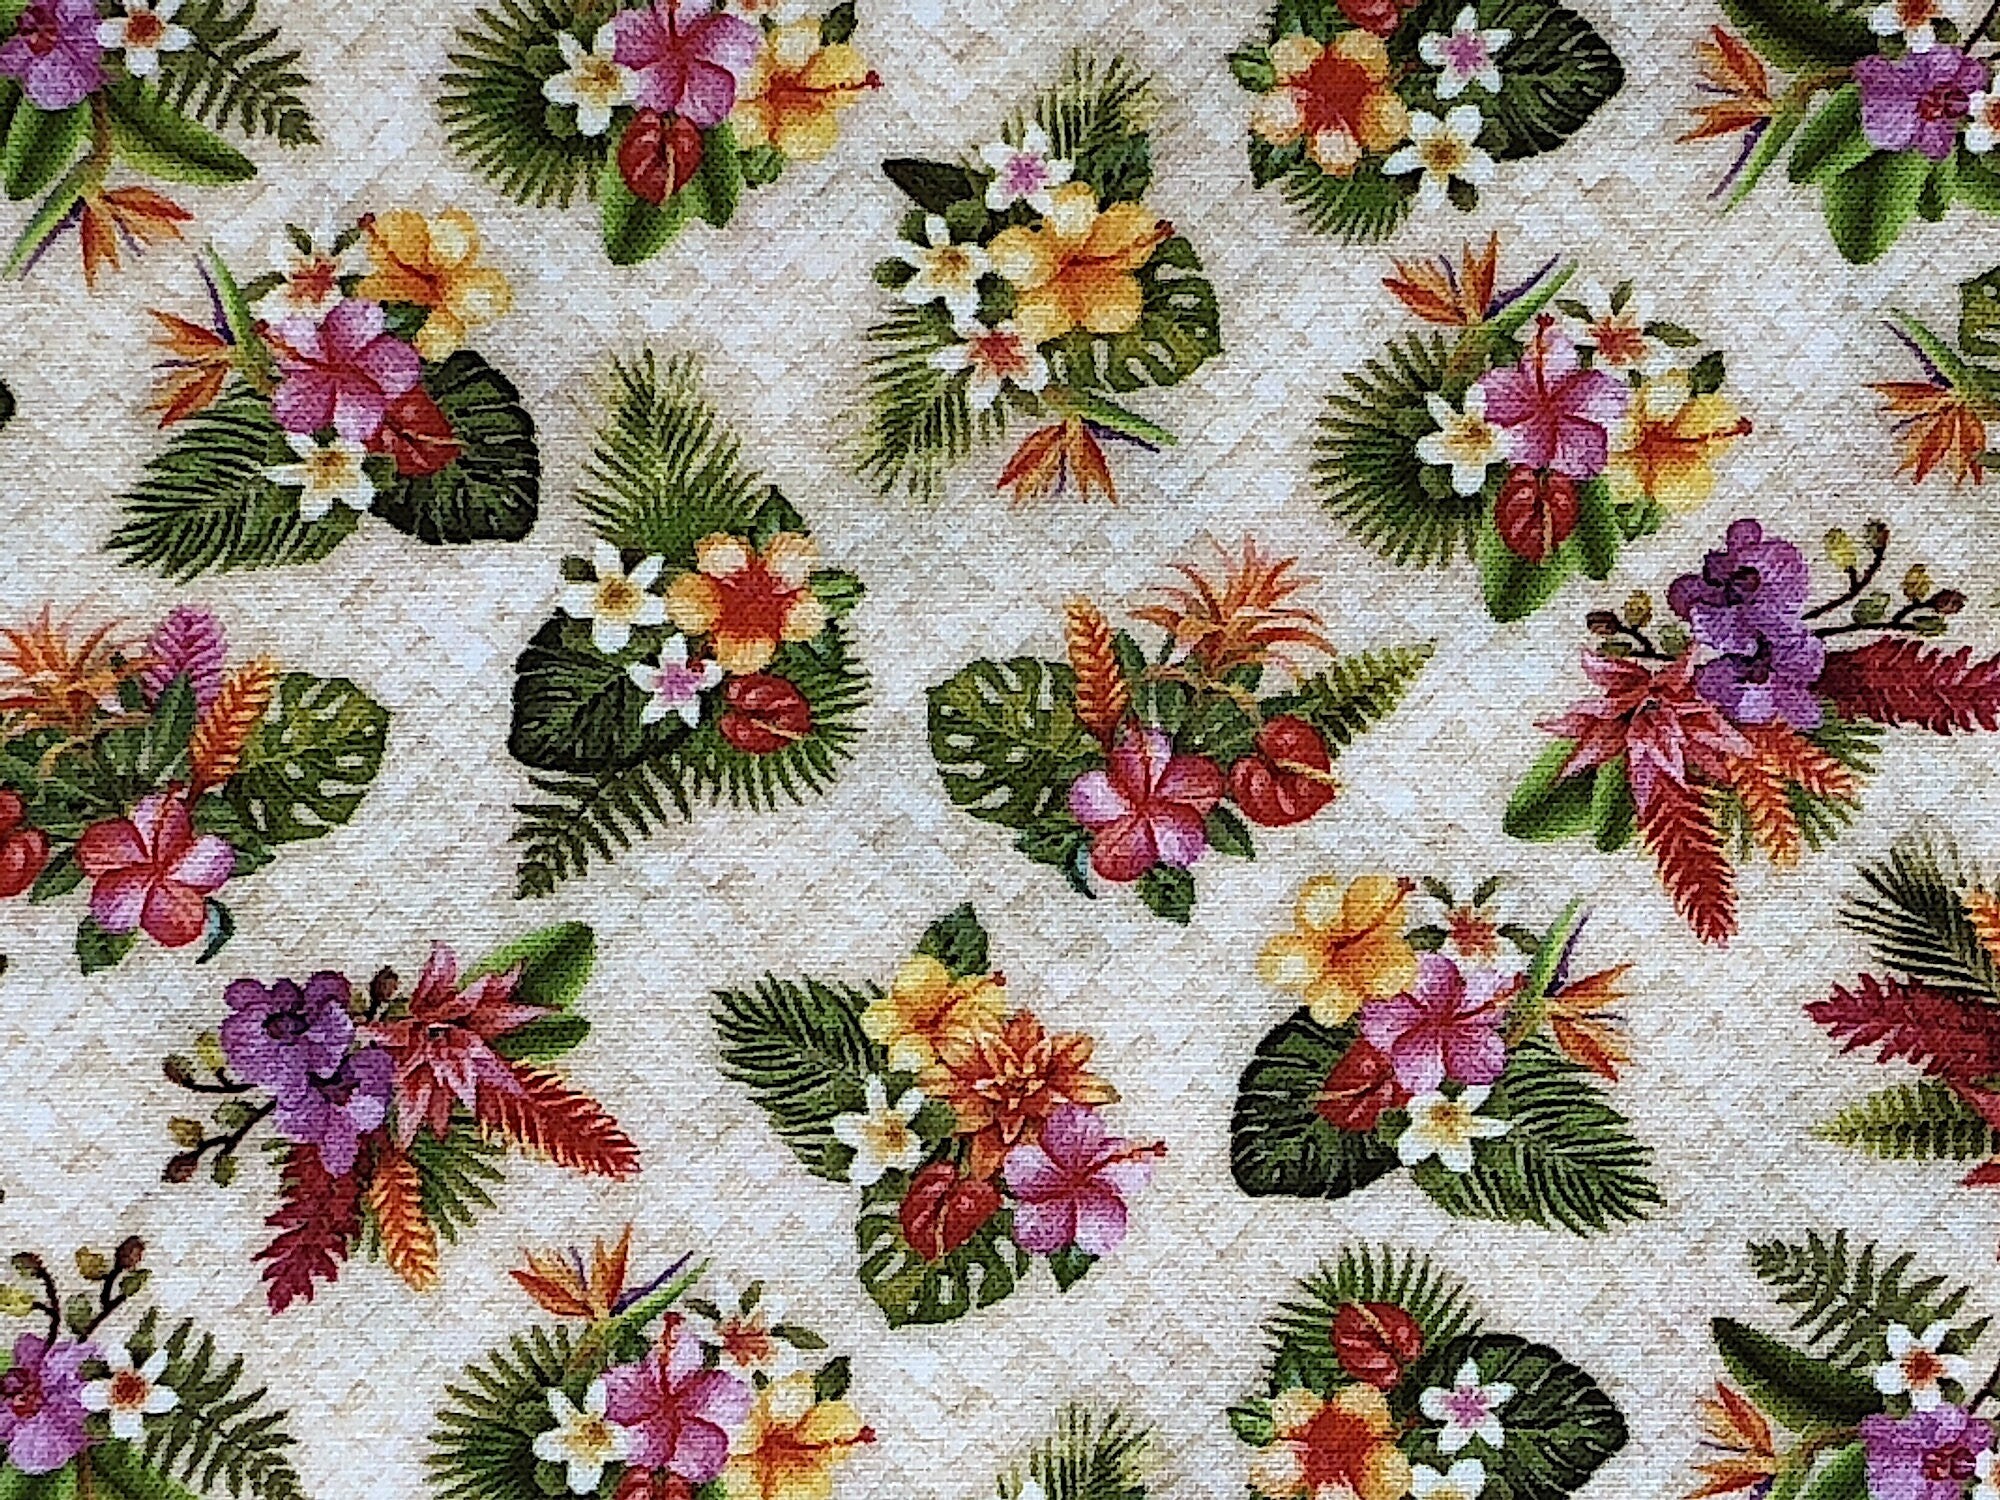 This fabric is a pretty tropical floral print with a light beige background. There are small flowers in groupings along with ferns and leaves.